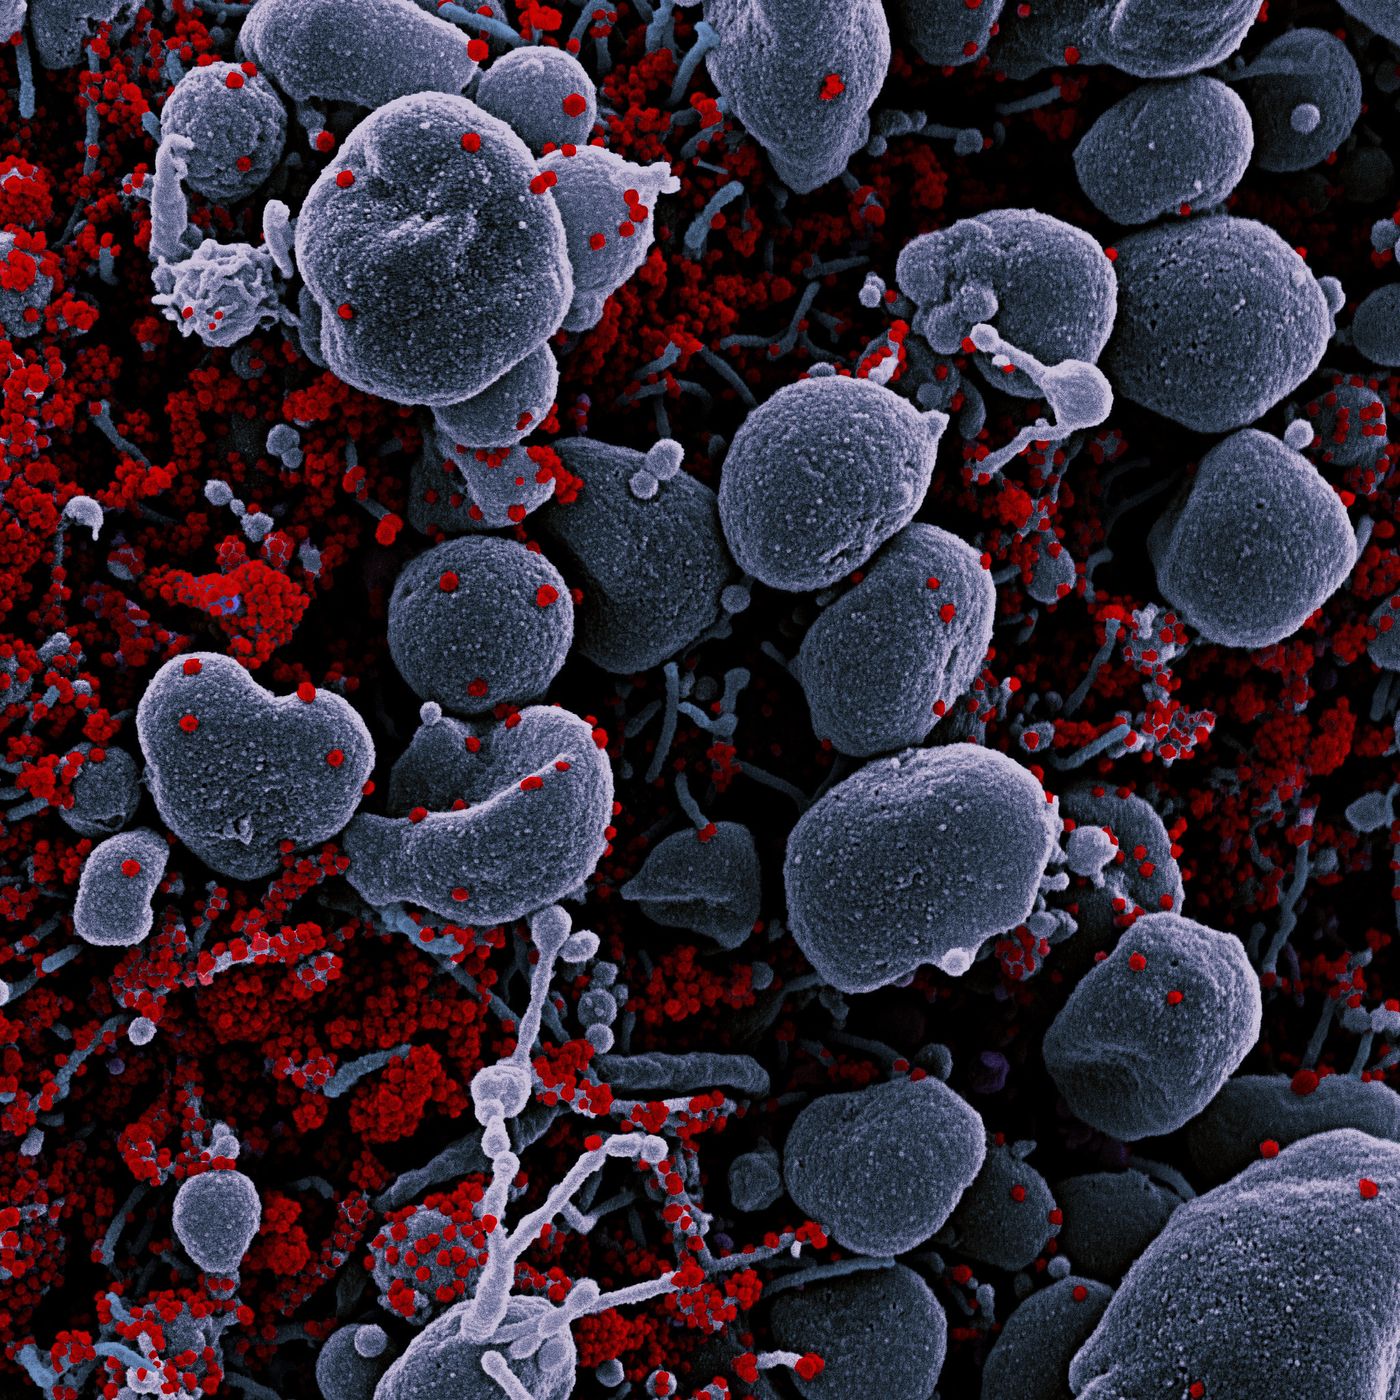 Colorized scanning electron micrograph of an apoptotic cell (gray) heavily infected with SARS-CoV-2 virus particles (red), isolated from a patient sample. Image captured at the NIAID Integrated Research Facility (IRF) in Fort Detrick, Maryland. / Credit: NIAID